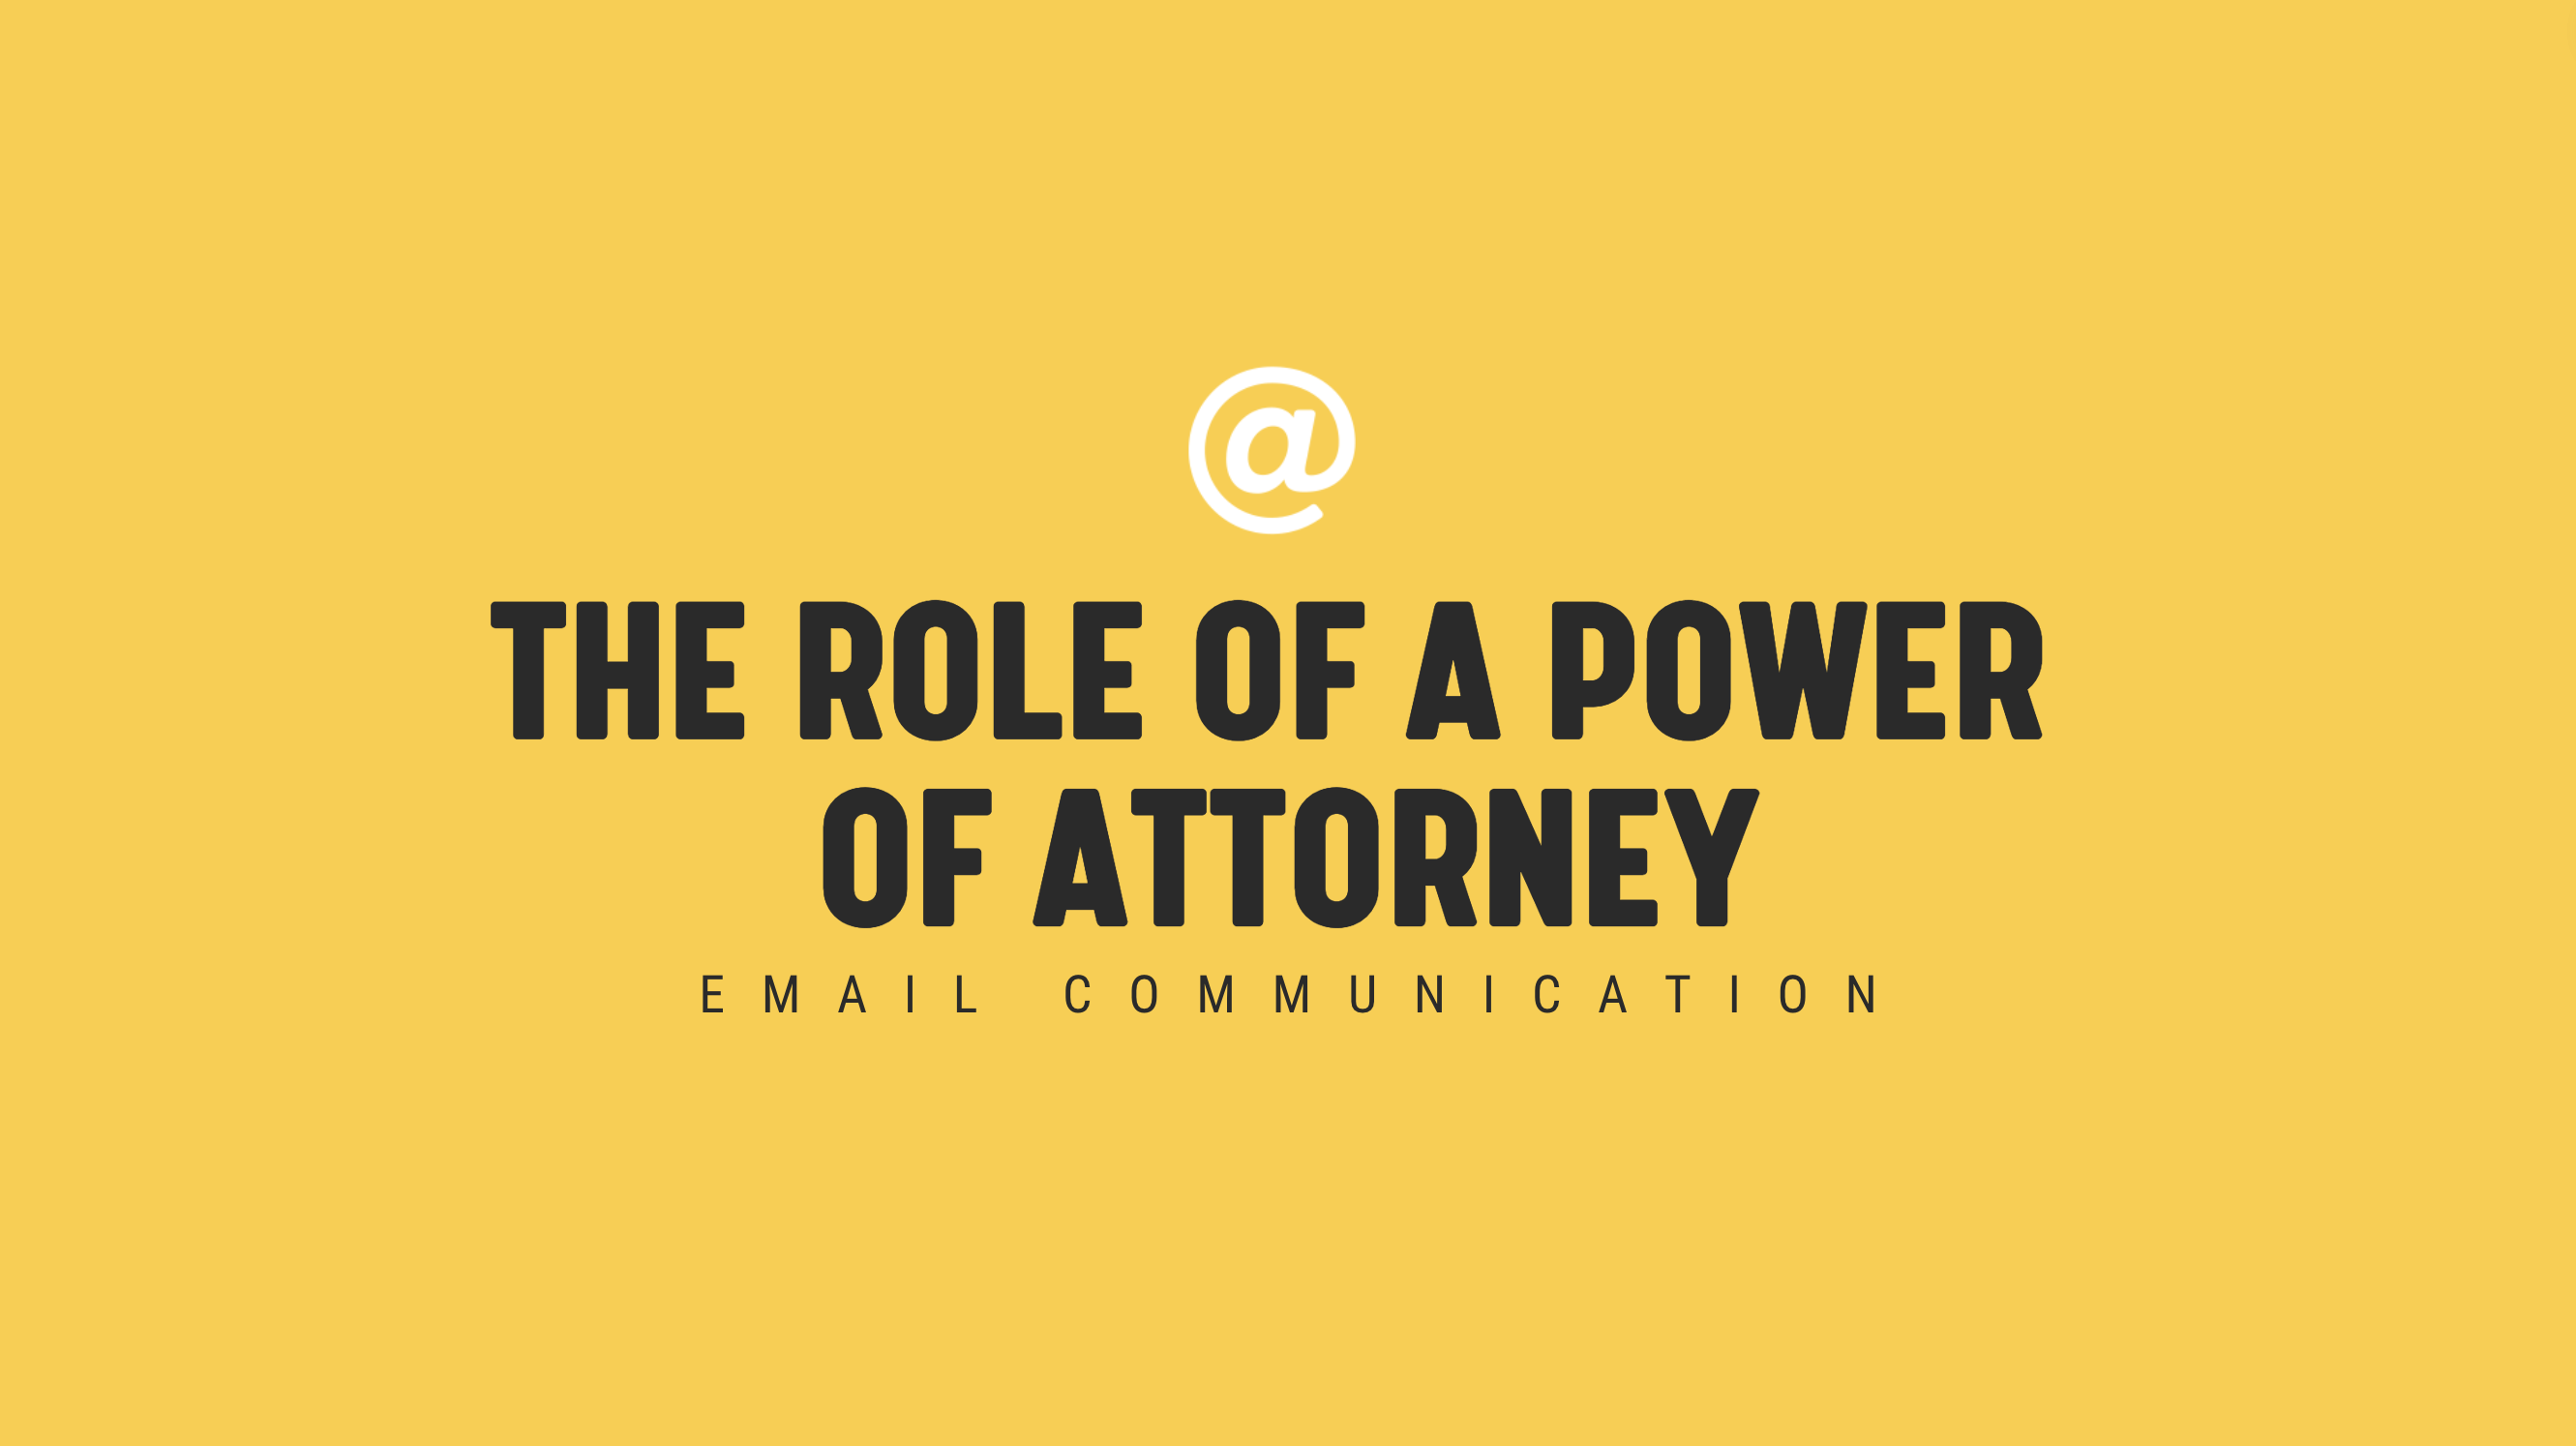 [NEW] The Role of a Power of Attorney - Single Email